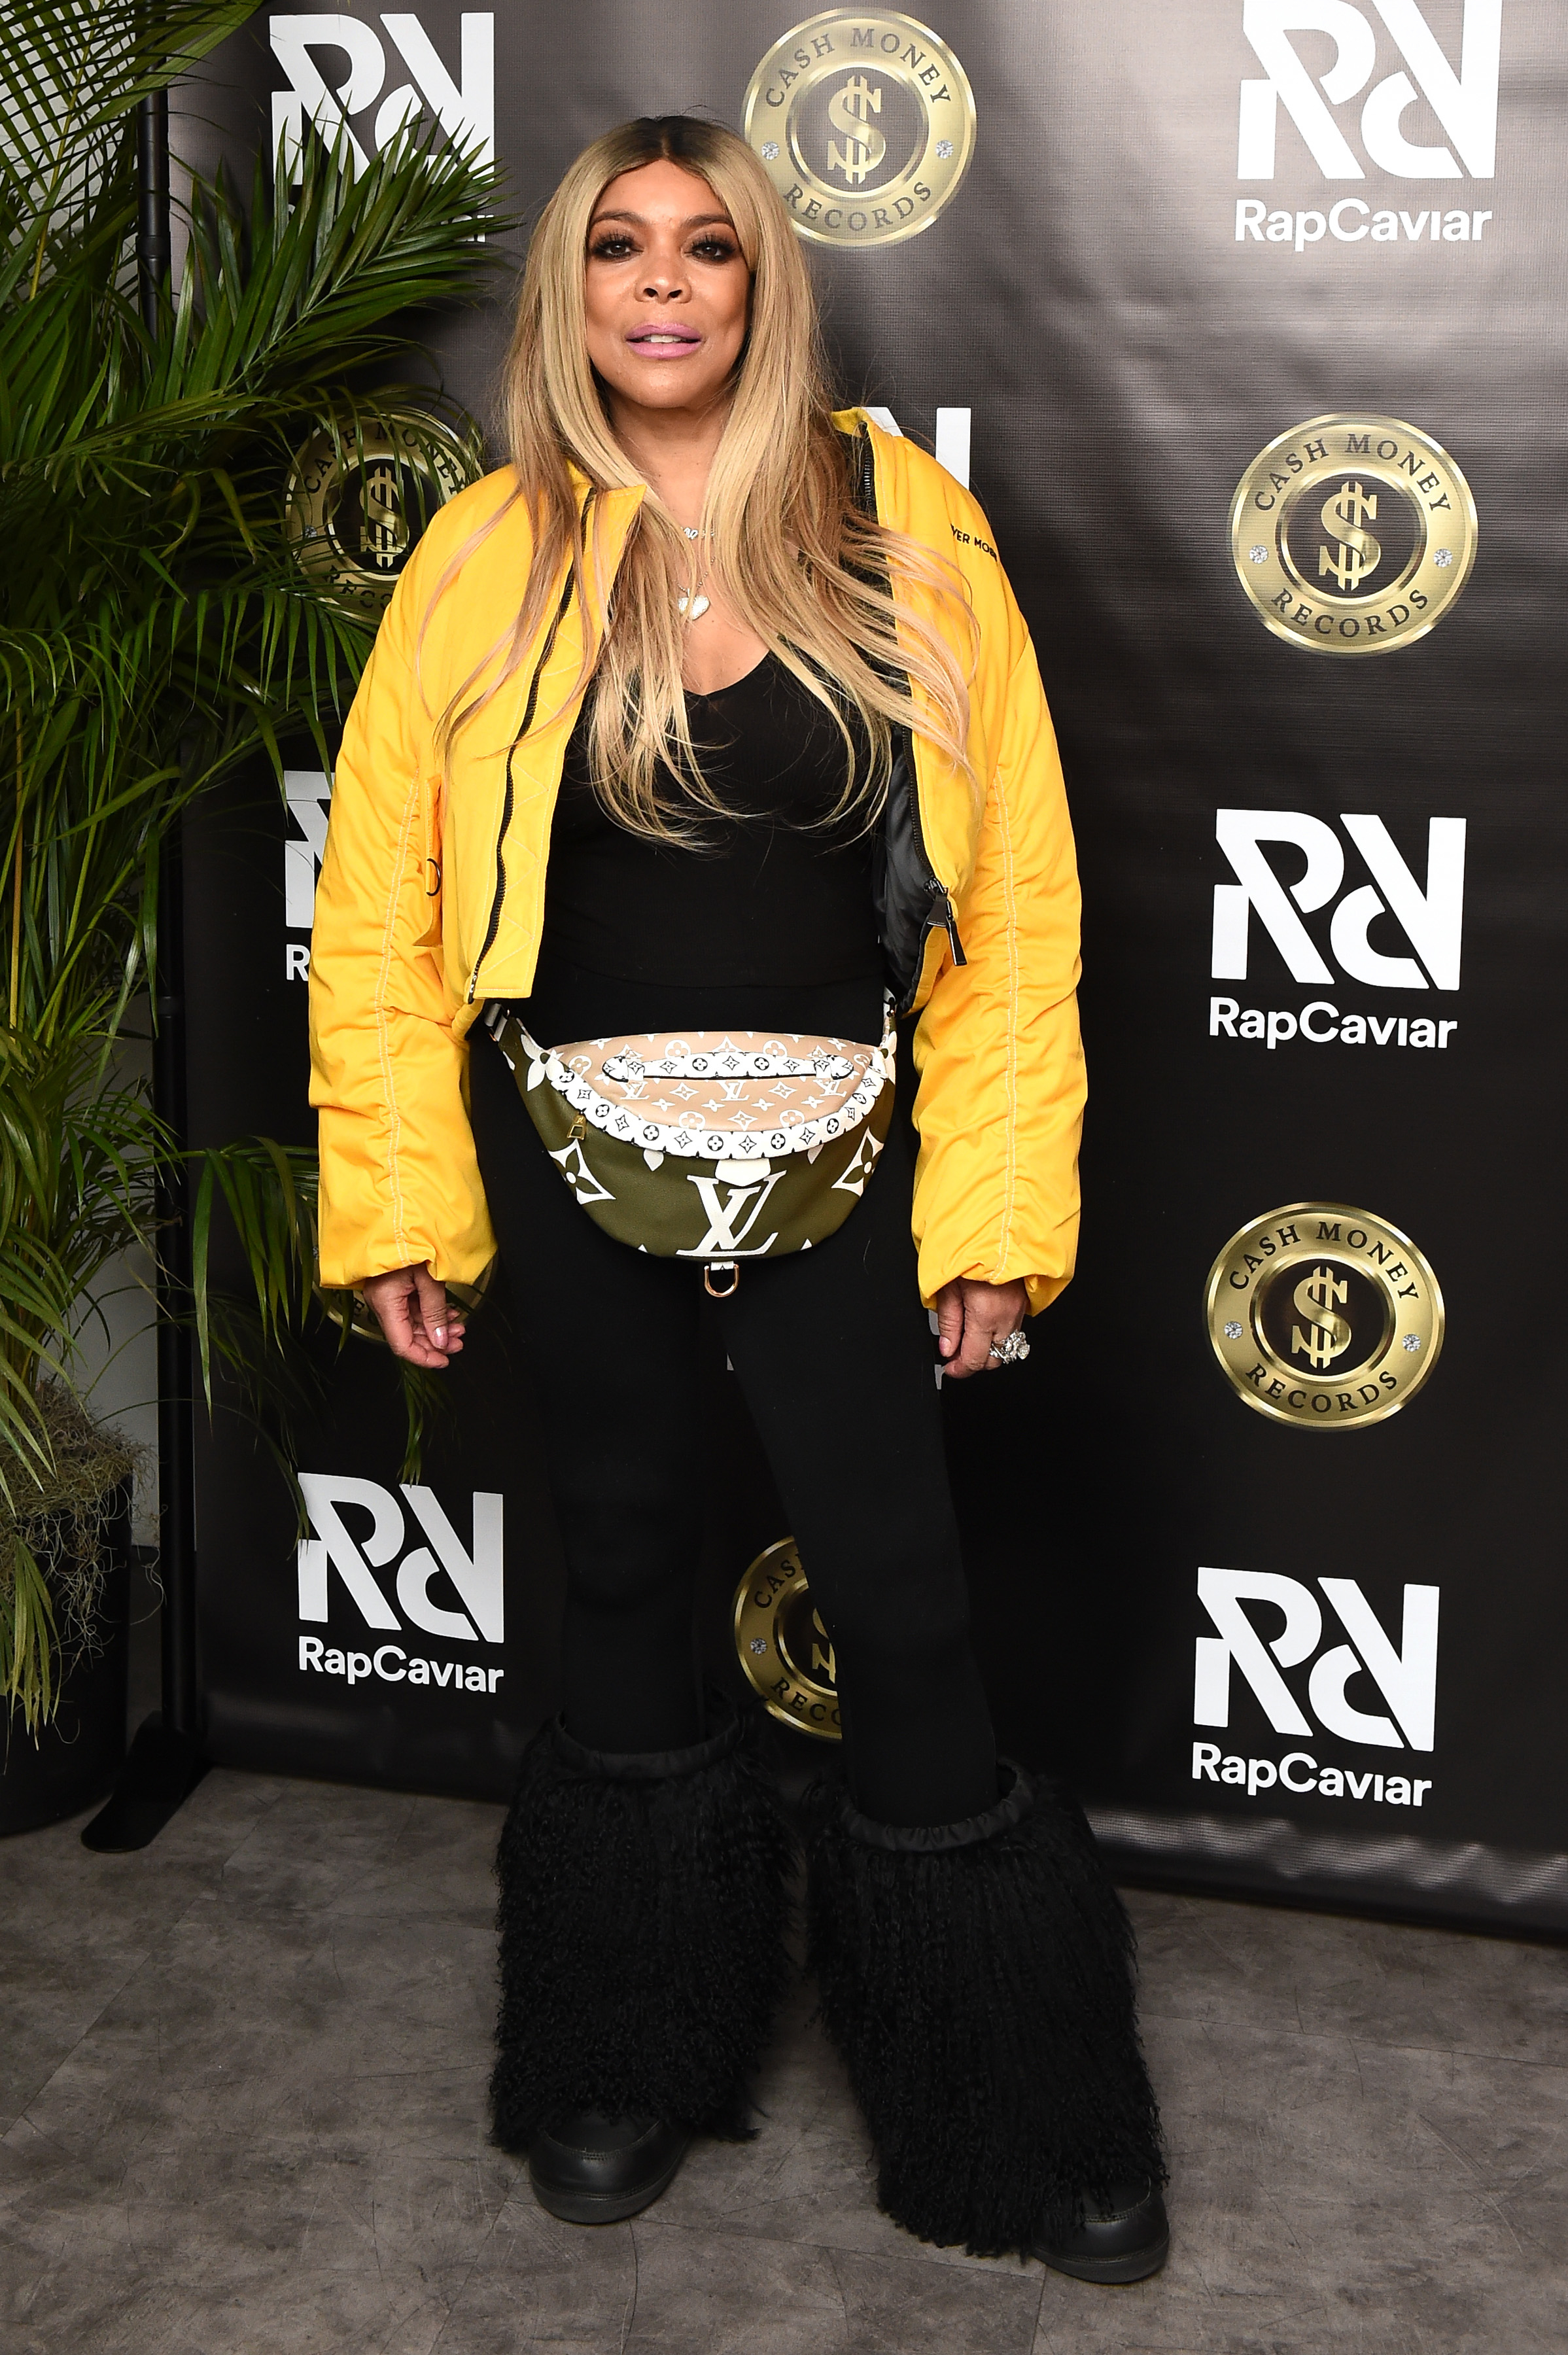 Wendy Williams in outfit with a jacket and fanny pack, at RapCaviar event